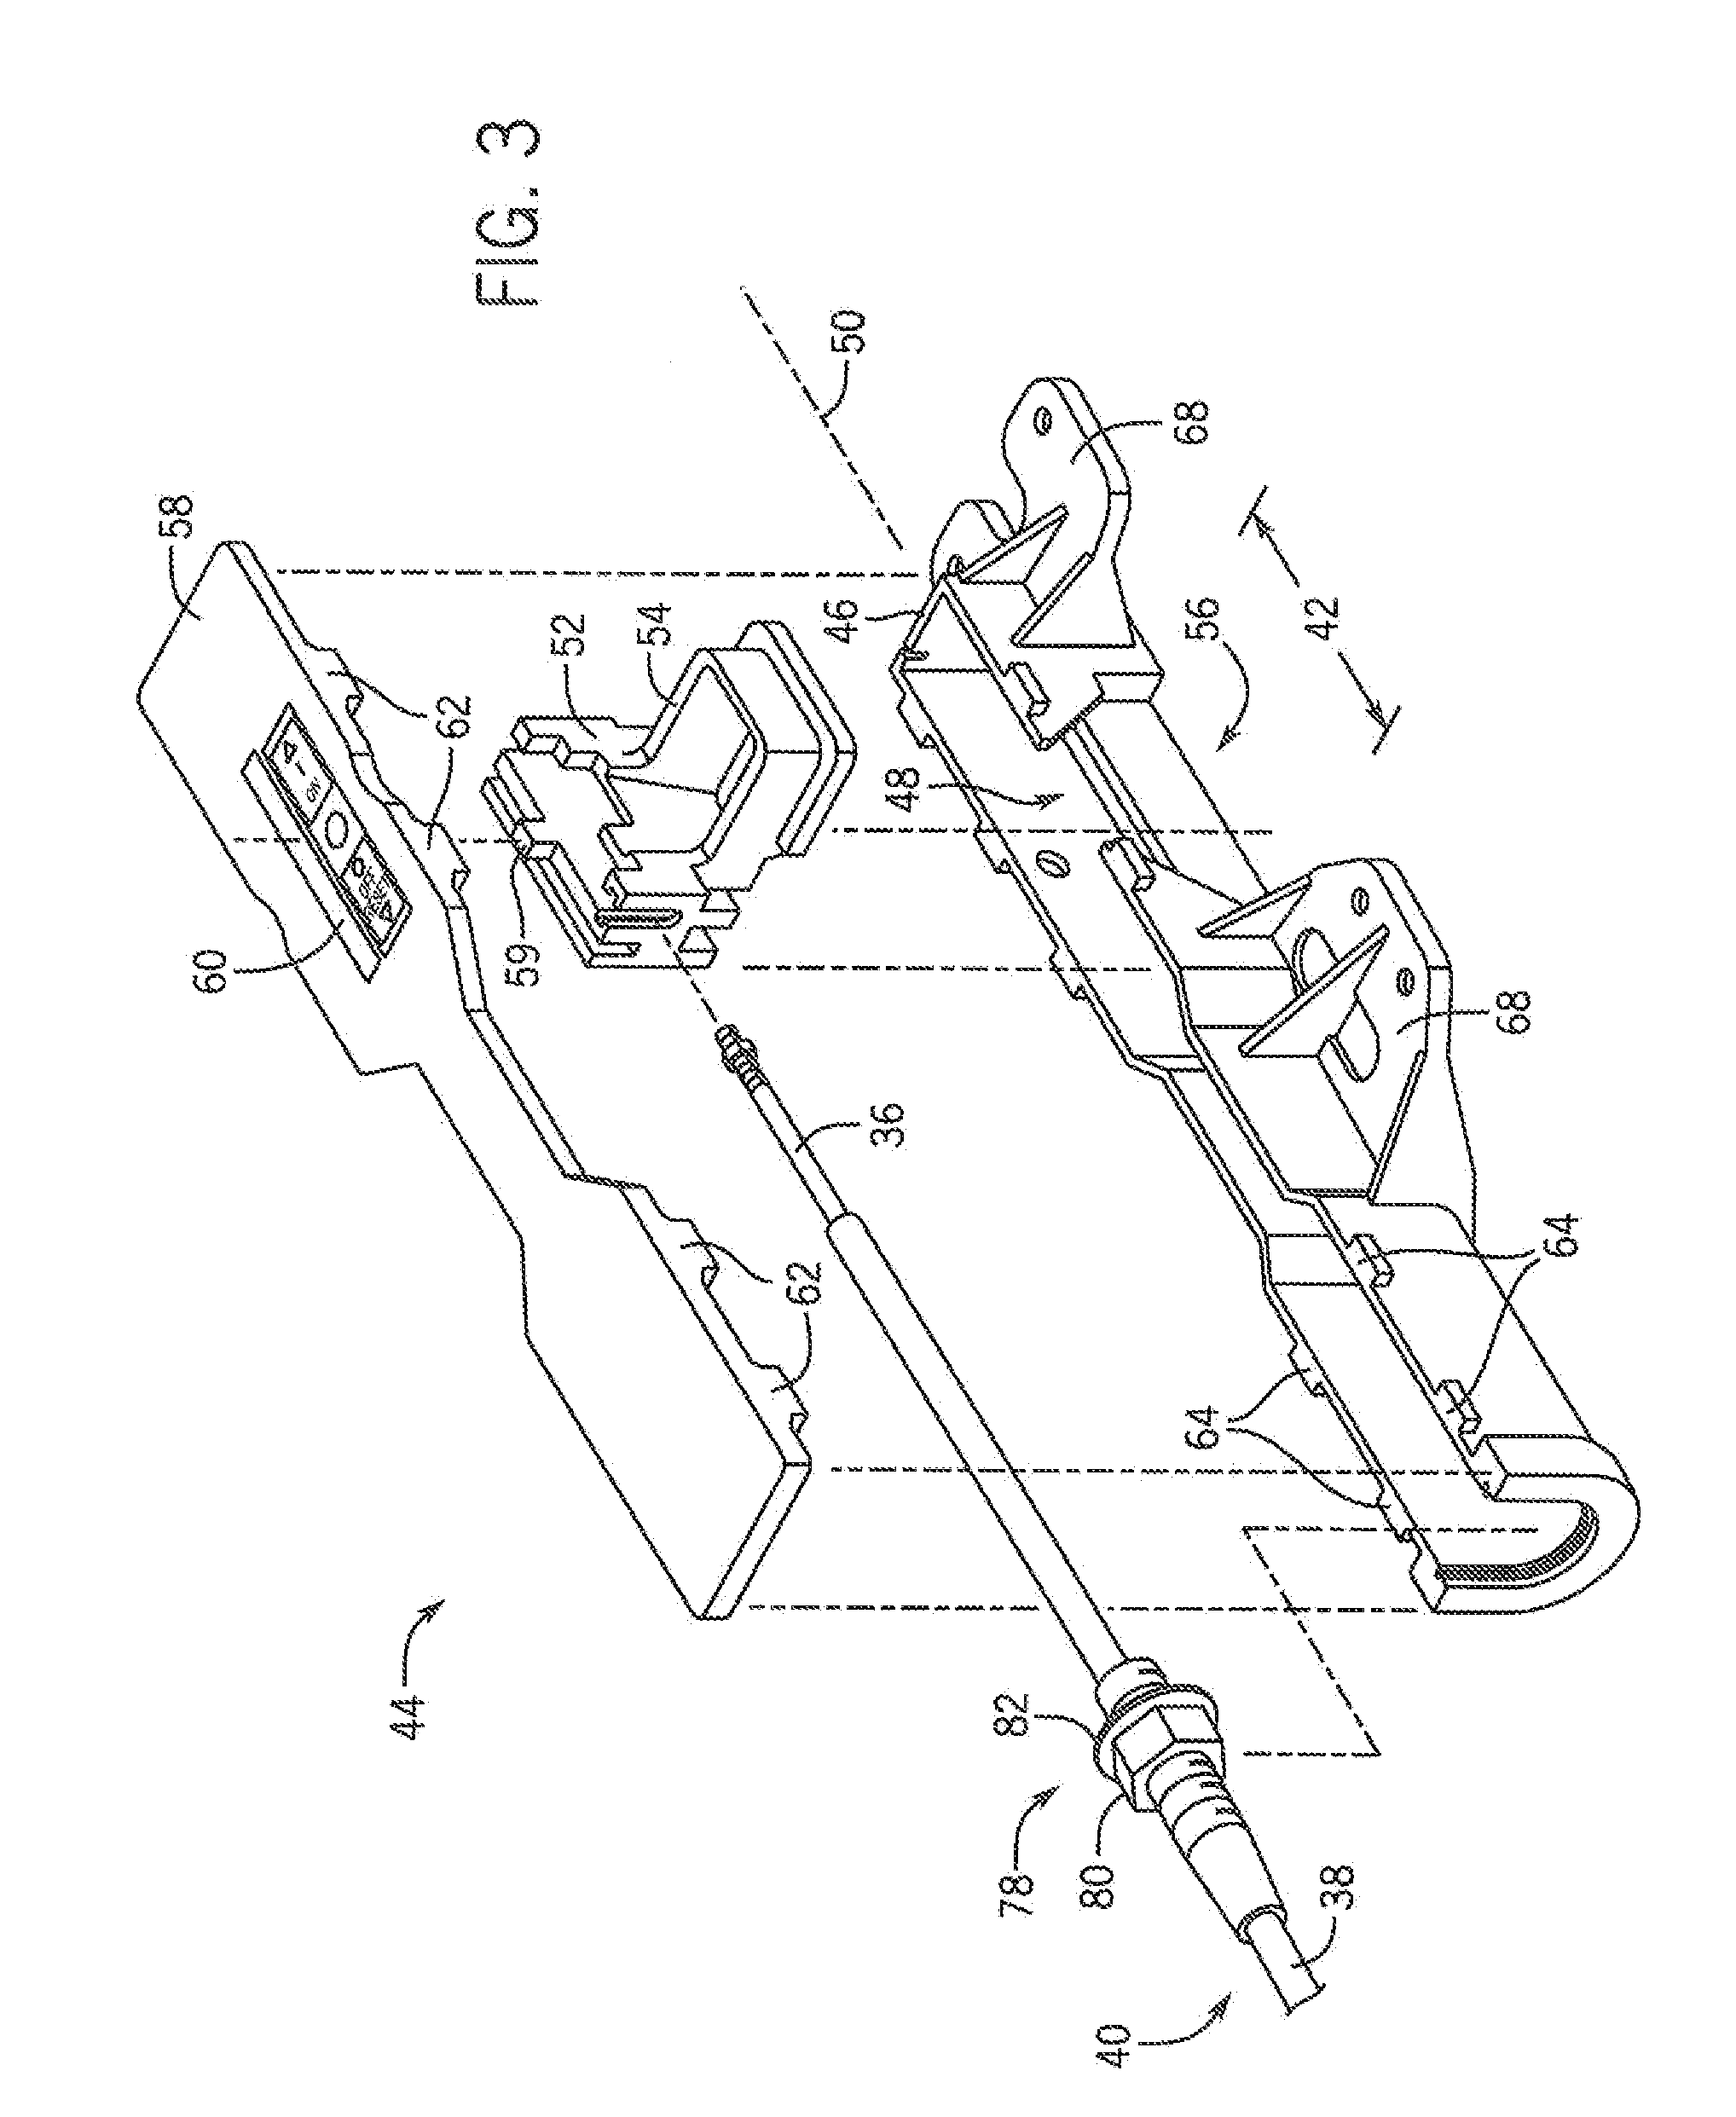 Flexible cable assembly for high-power switch gear